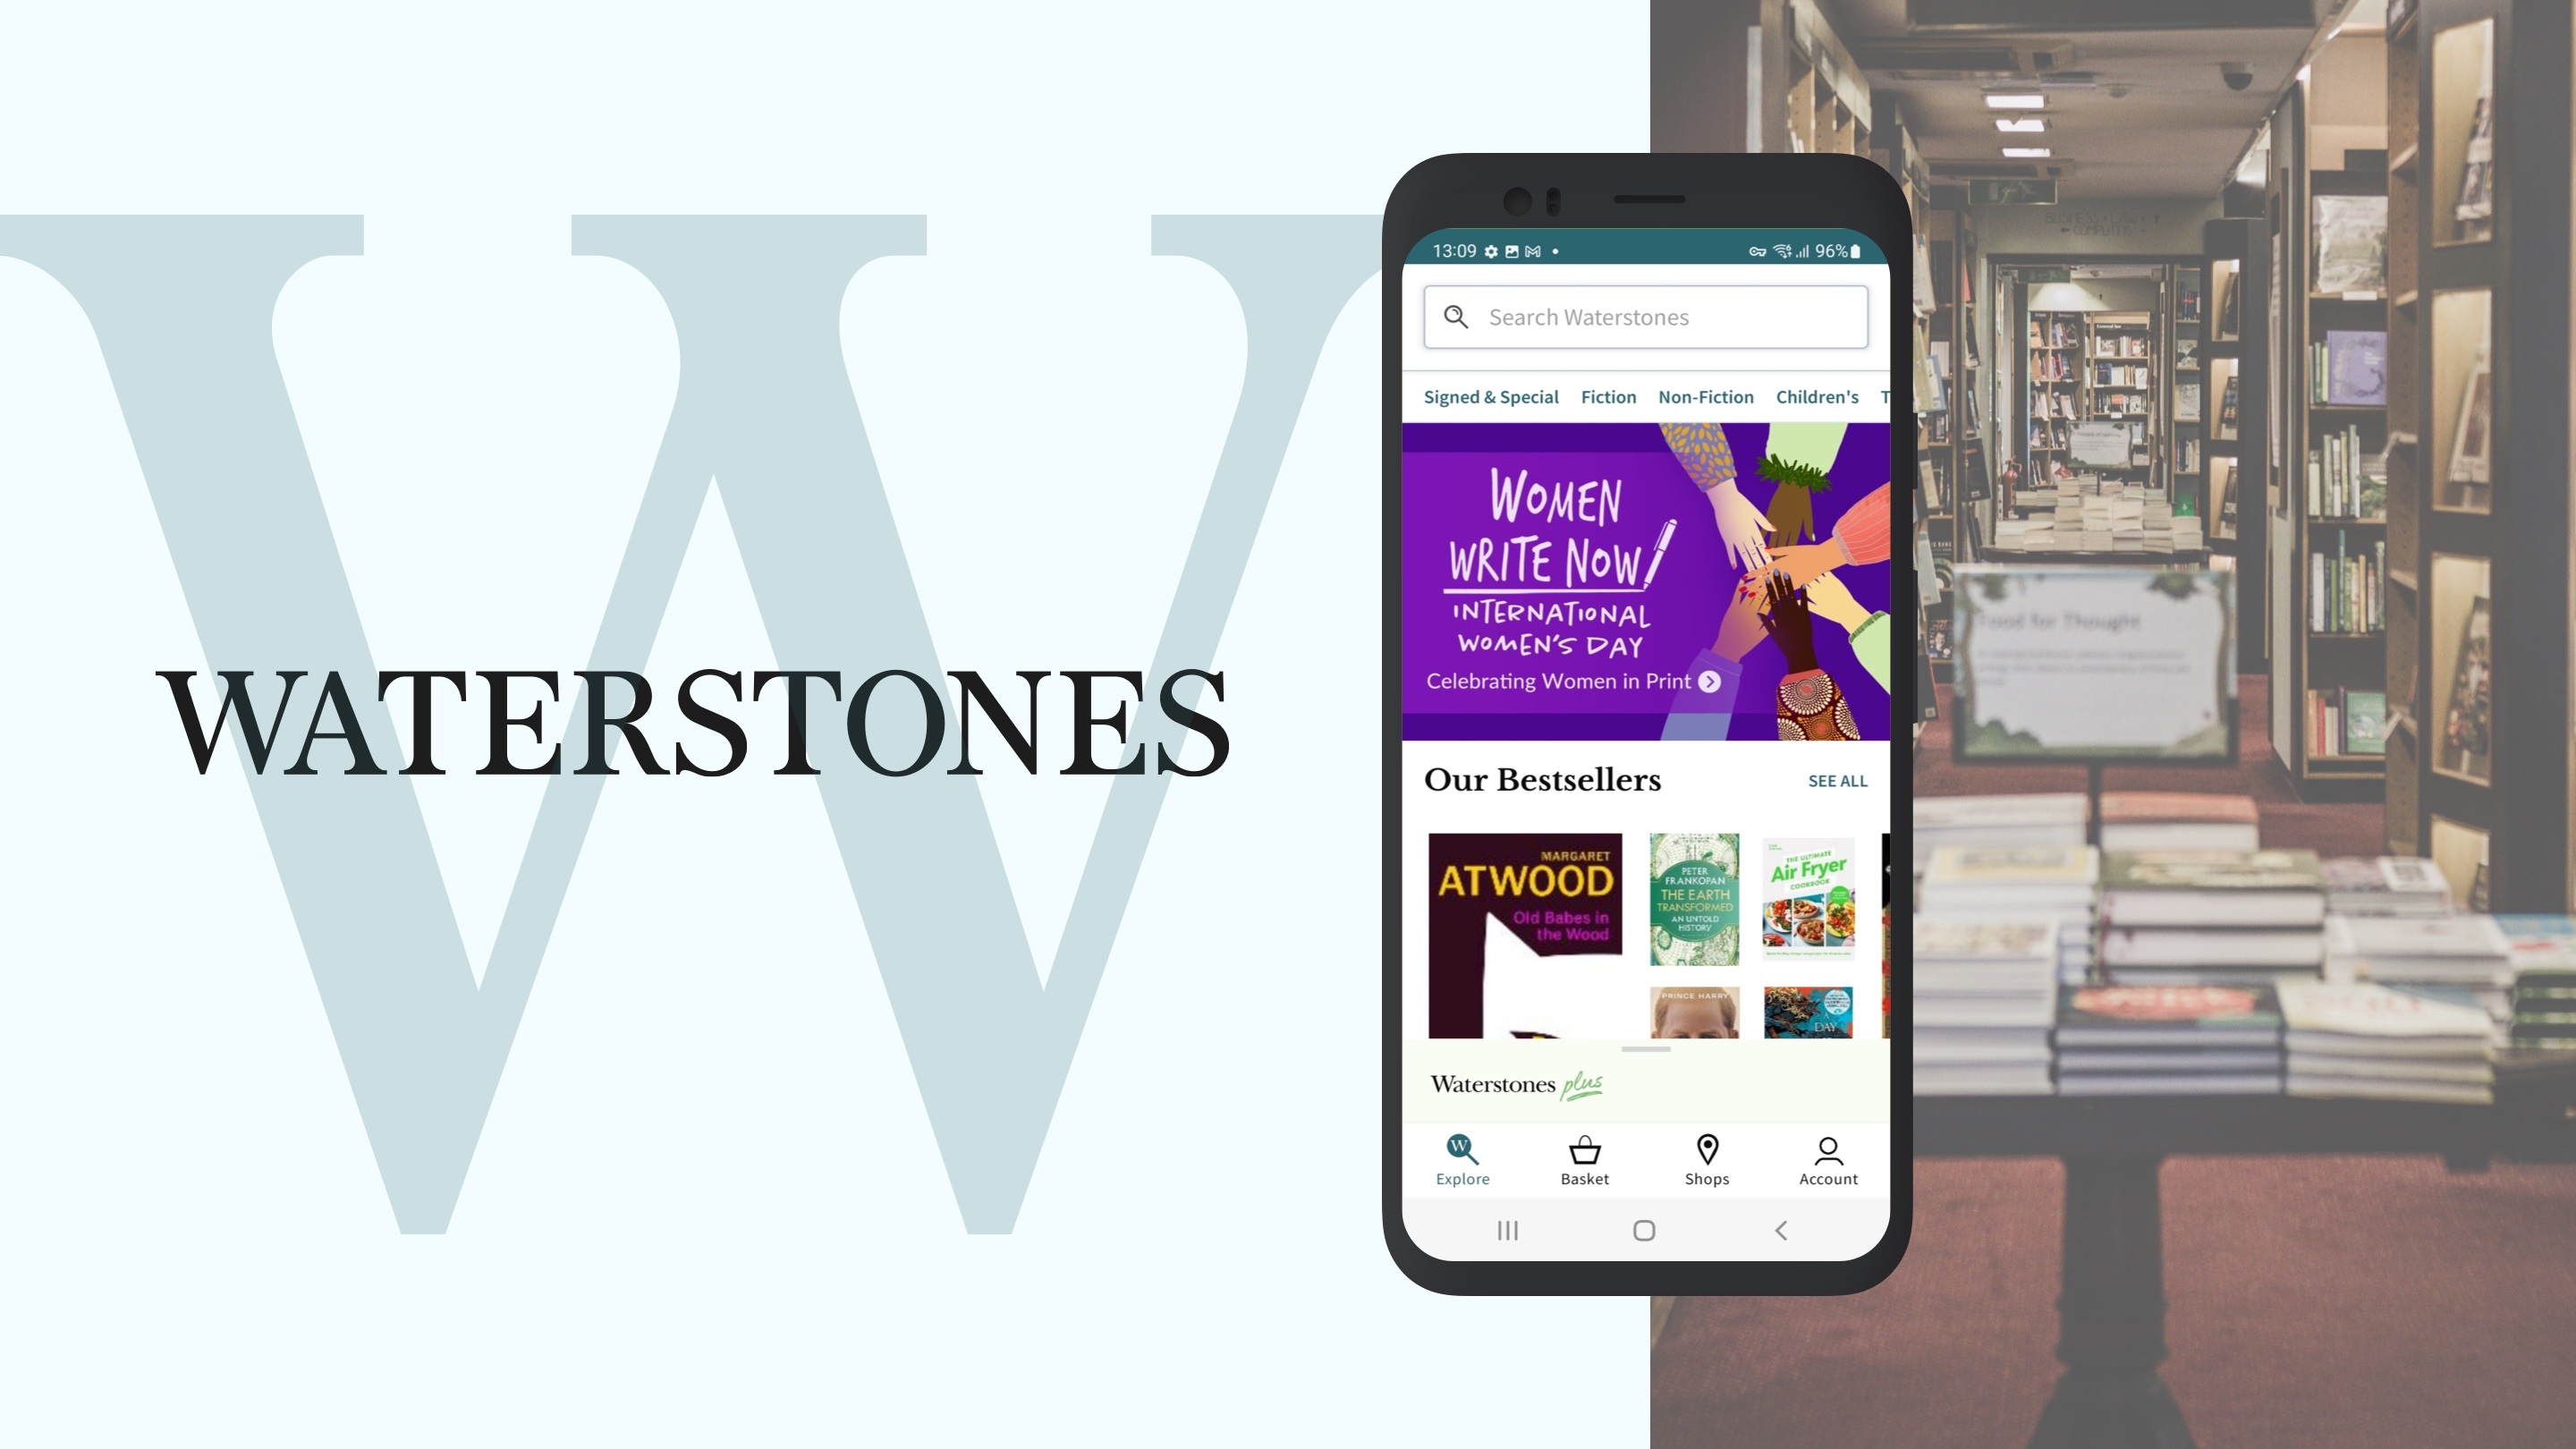 Waterstones Logo and bookstore in the background and a mockup of the app on a mobile phone in the forefront